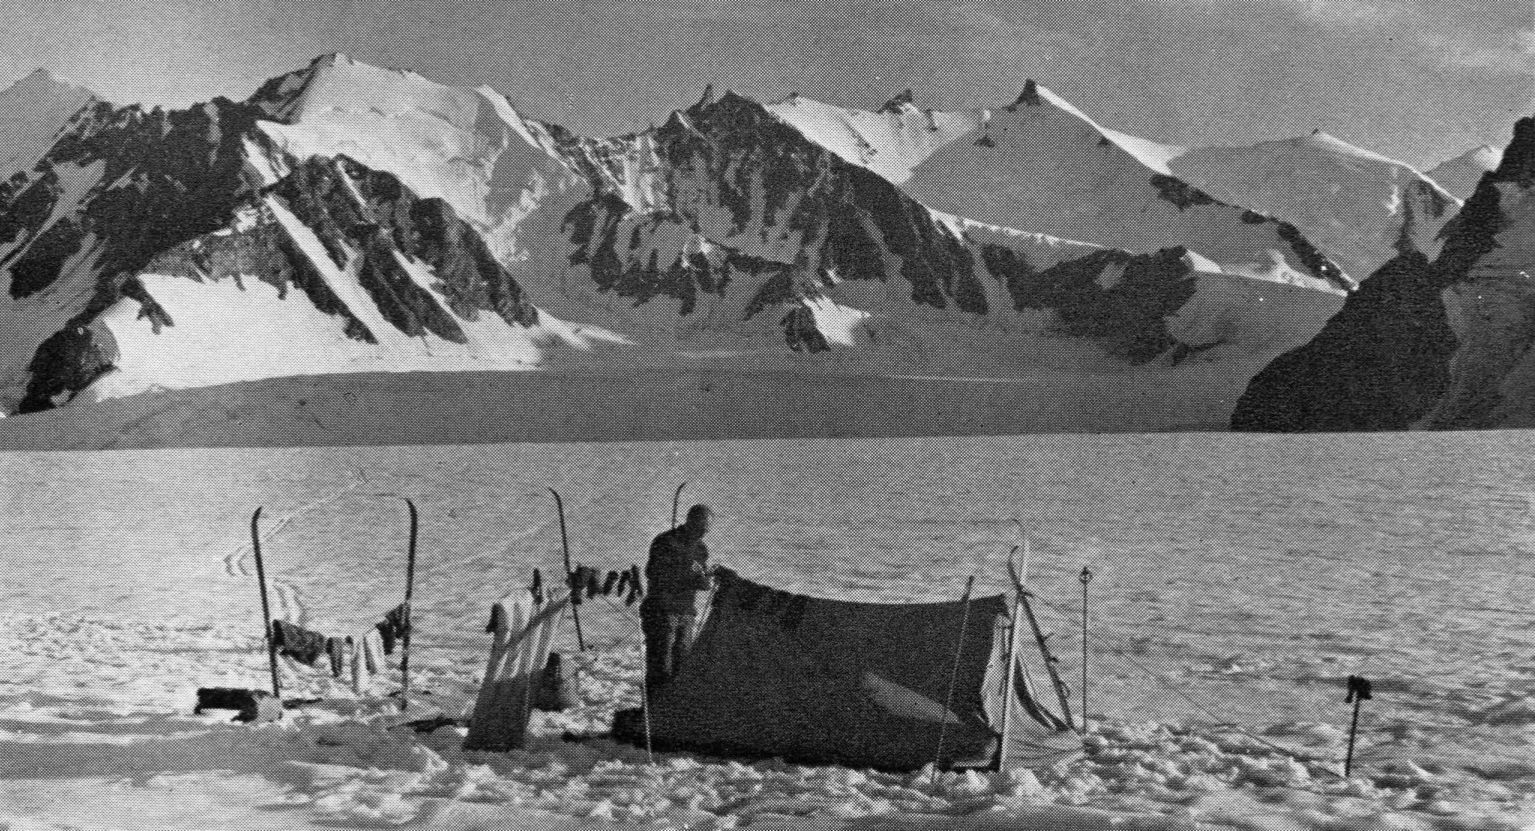 Camp in upper basin of the Lang Gletscher of Staunings Alps in Greenland